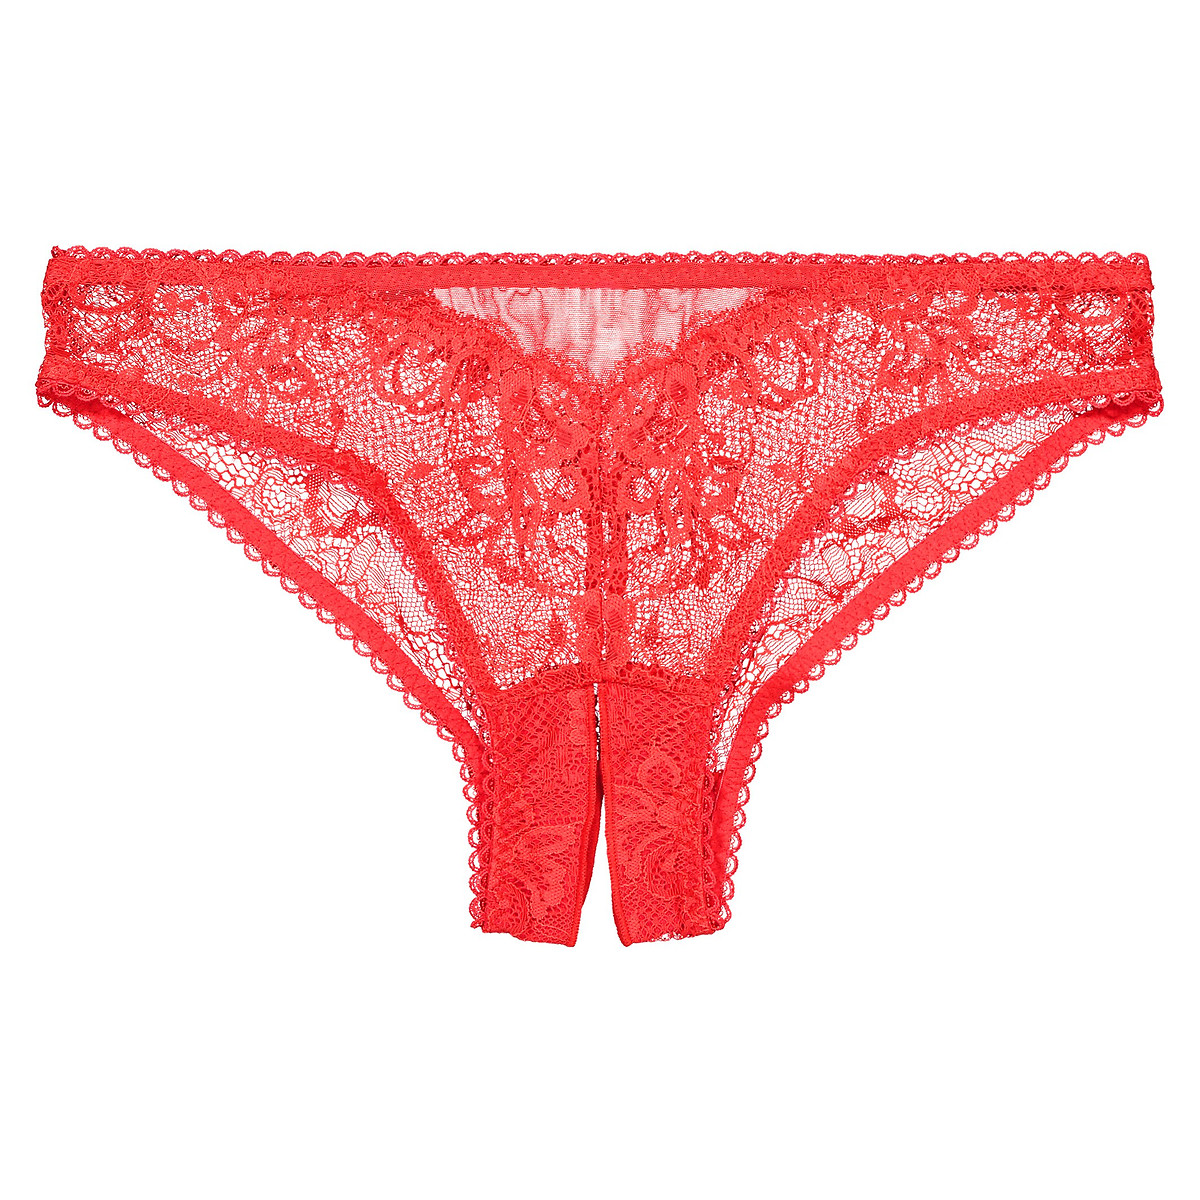 Satin and Lace Crotchless Backless Panty